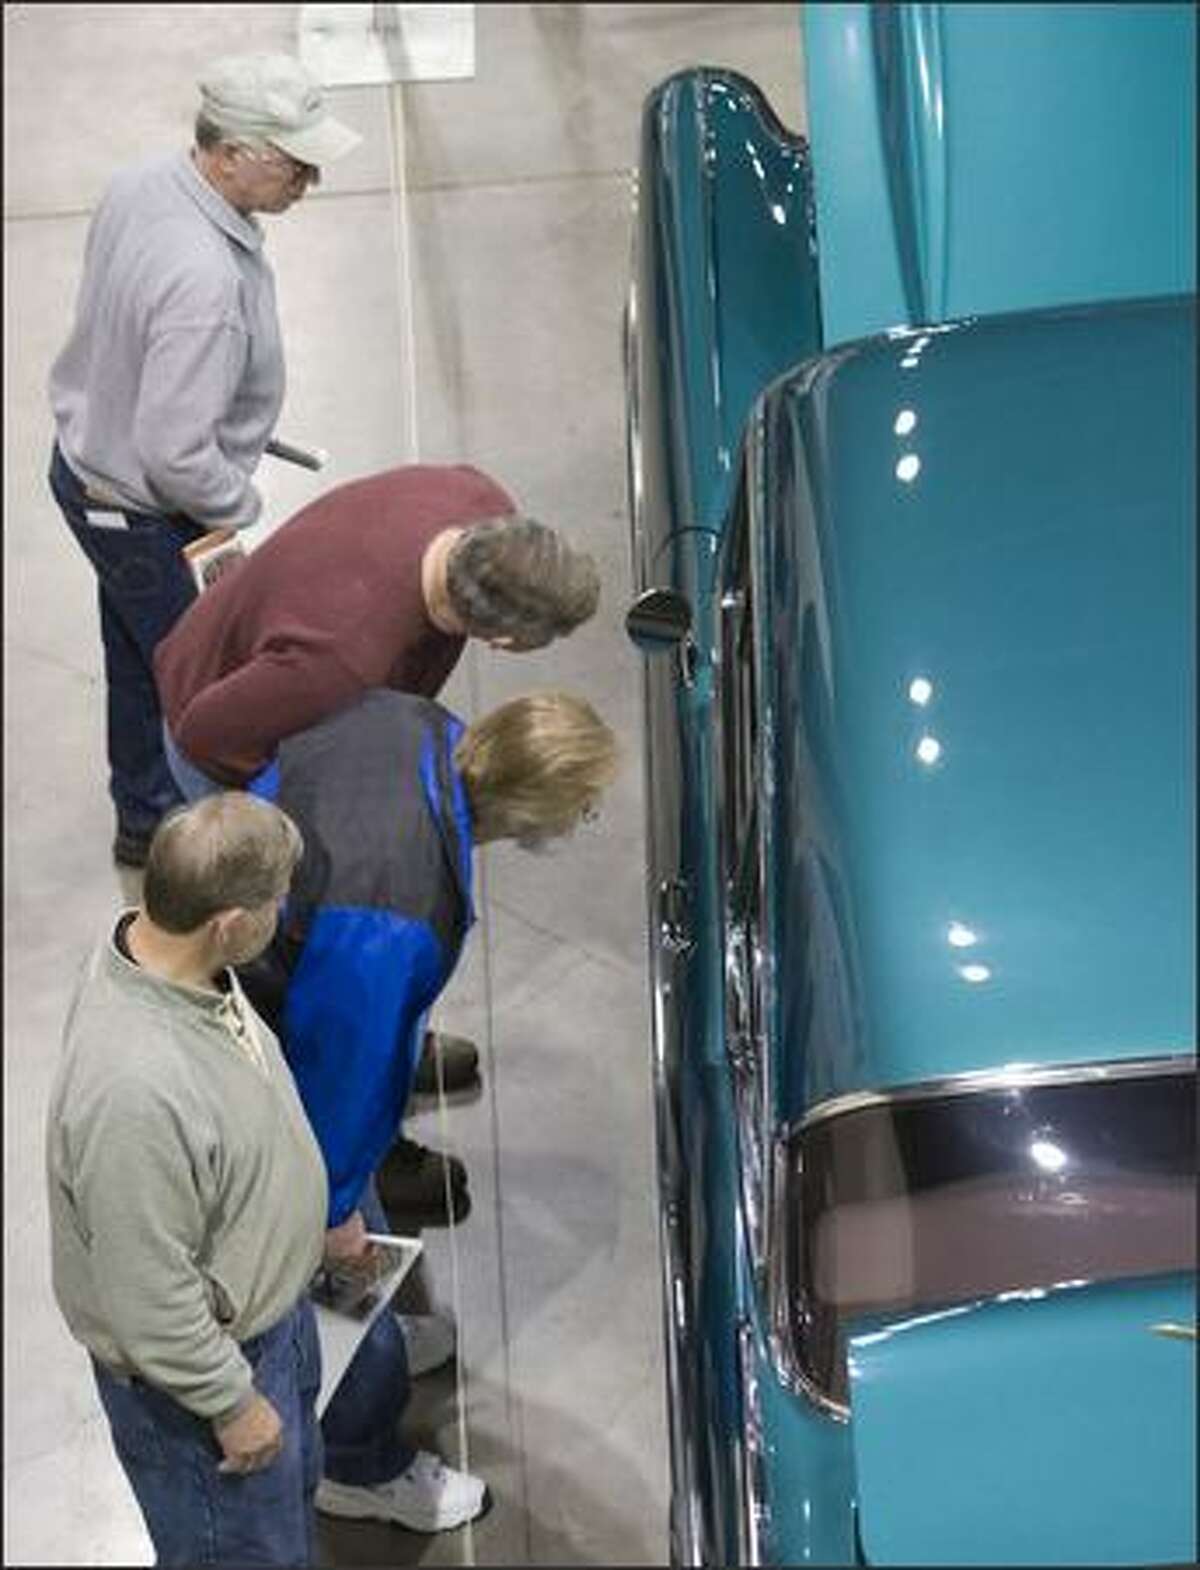 Visitors look at 1957 Chevy Bel Air Sedan owned by Ken and Angie Thomas The Seattle Roadster Show brought 283 cars, motorcycles and trucks to Qwest Field Event Center for a show of color, design, and shinny chrome for what looks like will be a gray rainy weekend.